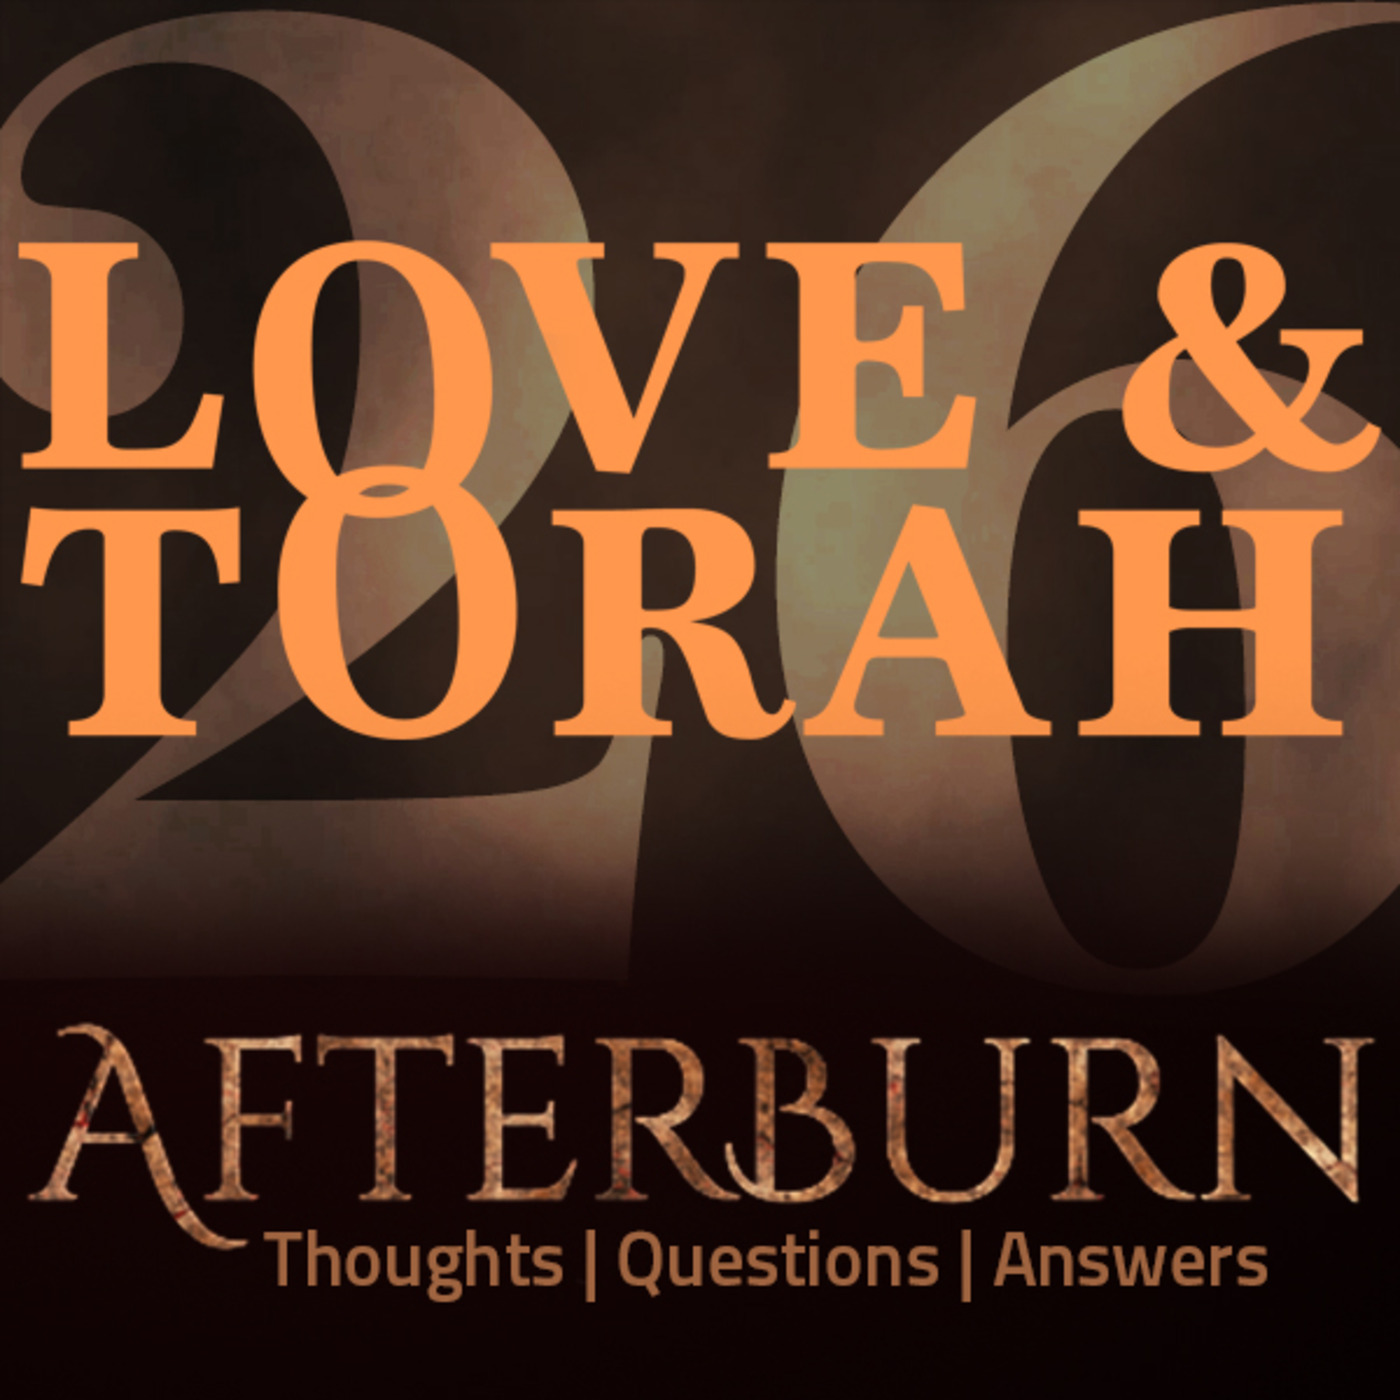 Episode 611: Afterburn | Thoughts, Q&A on Love and Torah | Part 26